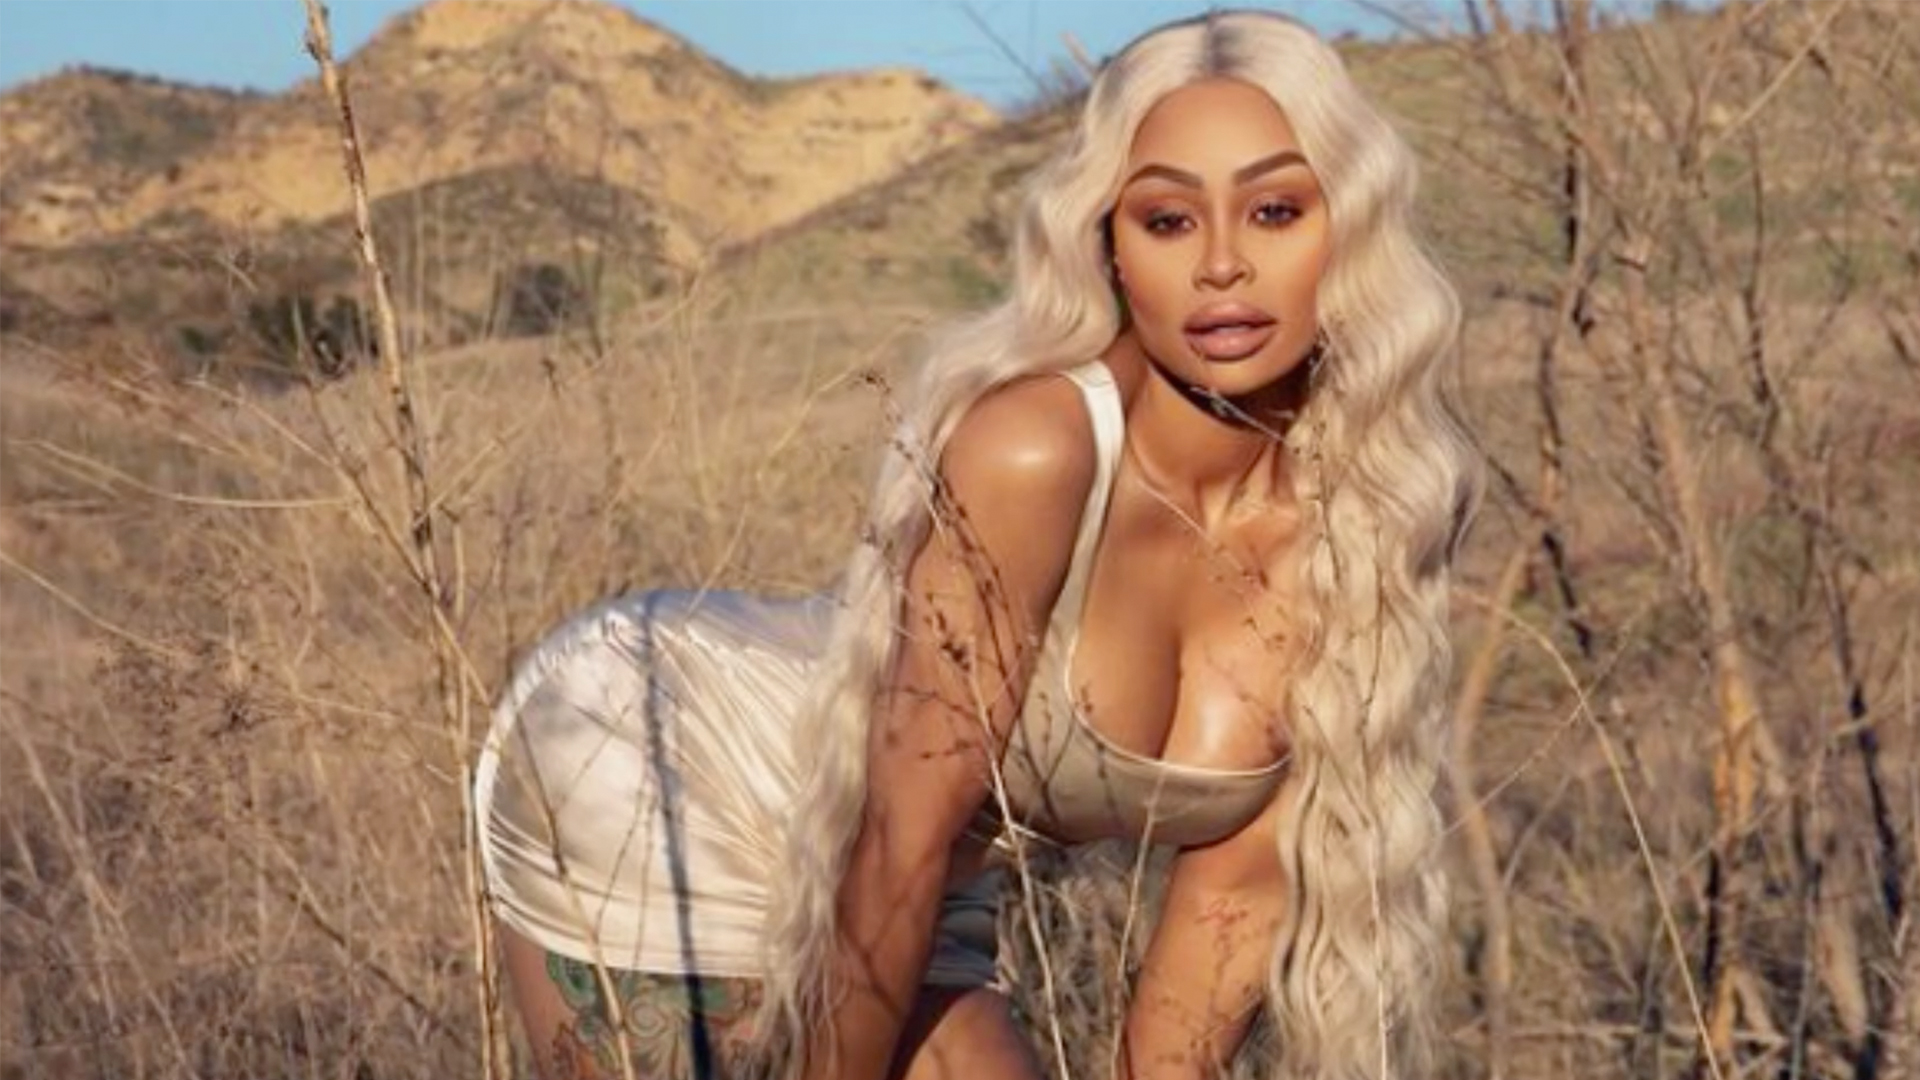 Watch #FunFactFriday: Blac Chyna | The Real Blac Chyna Video Extras